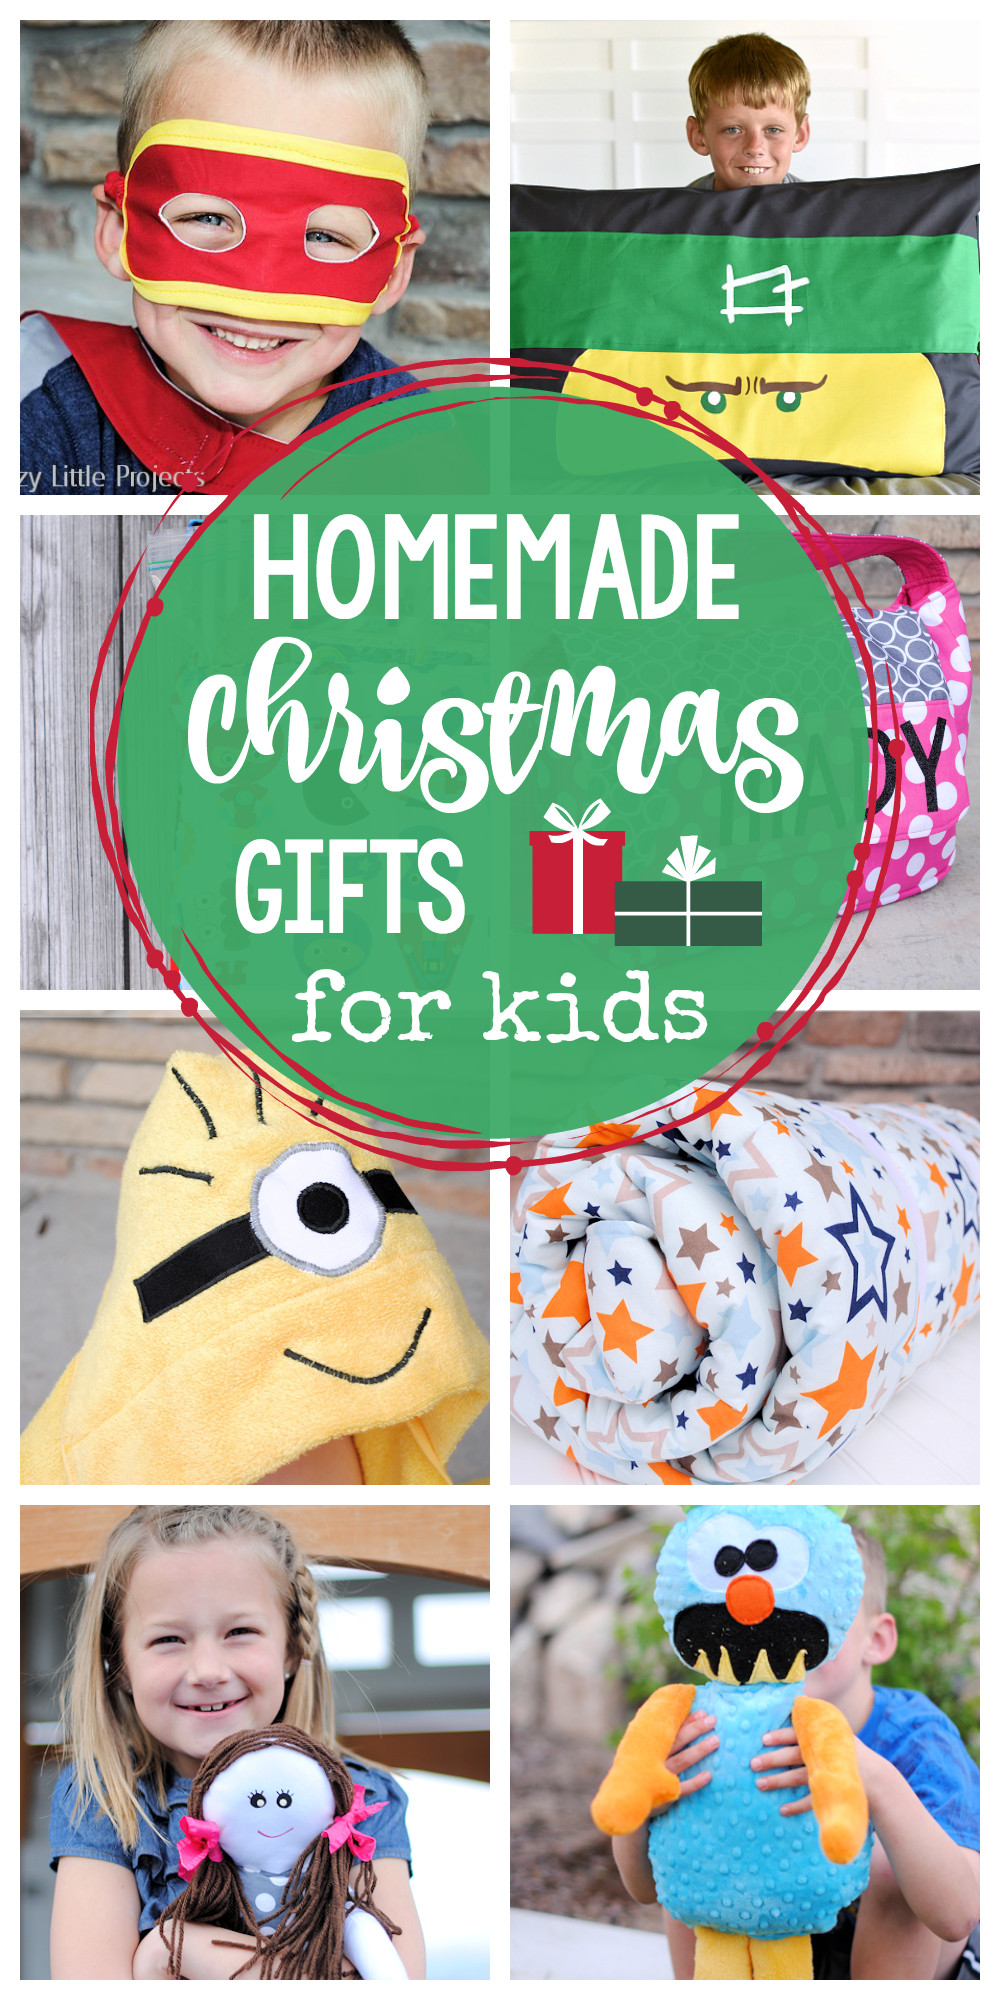 Homemade Gifts For Kids
 25 Homemade Christmas Gifts for Kids Crazy Little Projects